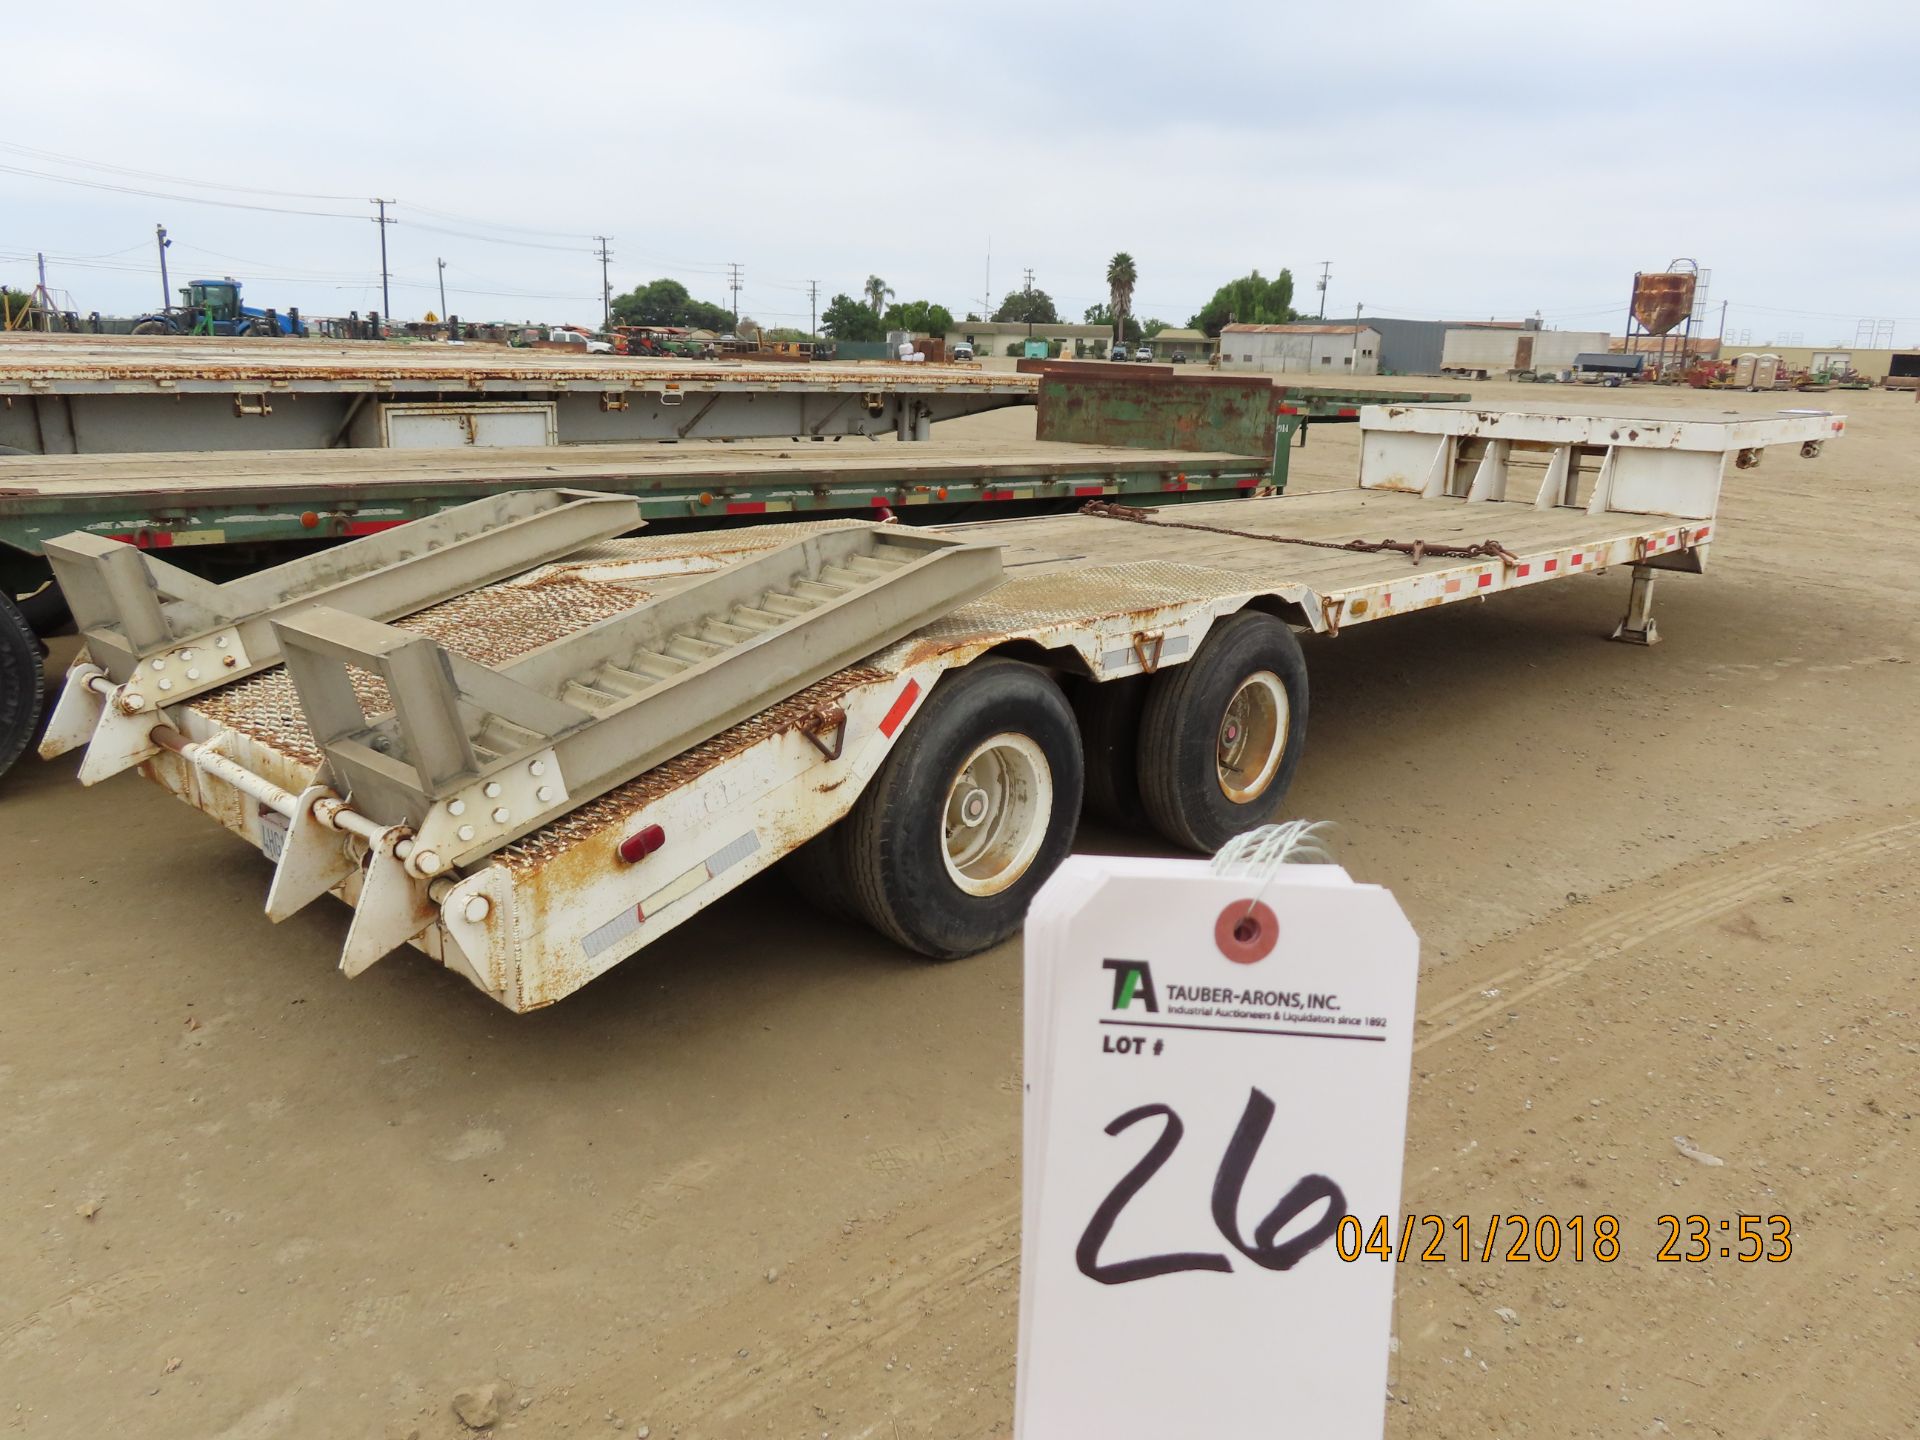 (1979) Barker 35'L x 92''W Step Deck Trailer 2-Axle w/ Loading Ramps, Top Deck Dimensions 115'' x - Image 2 of 3